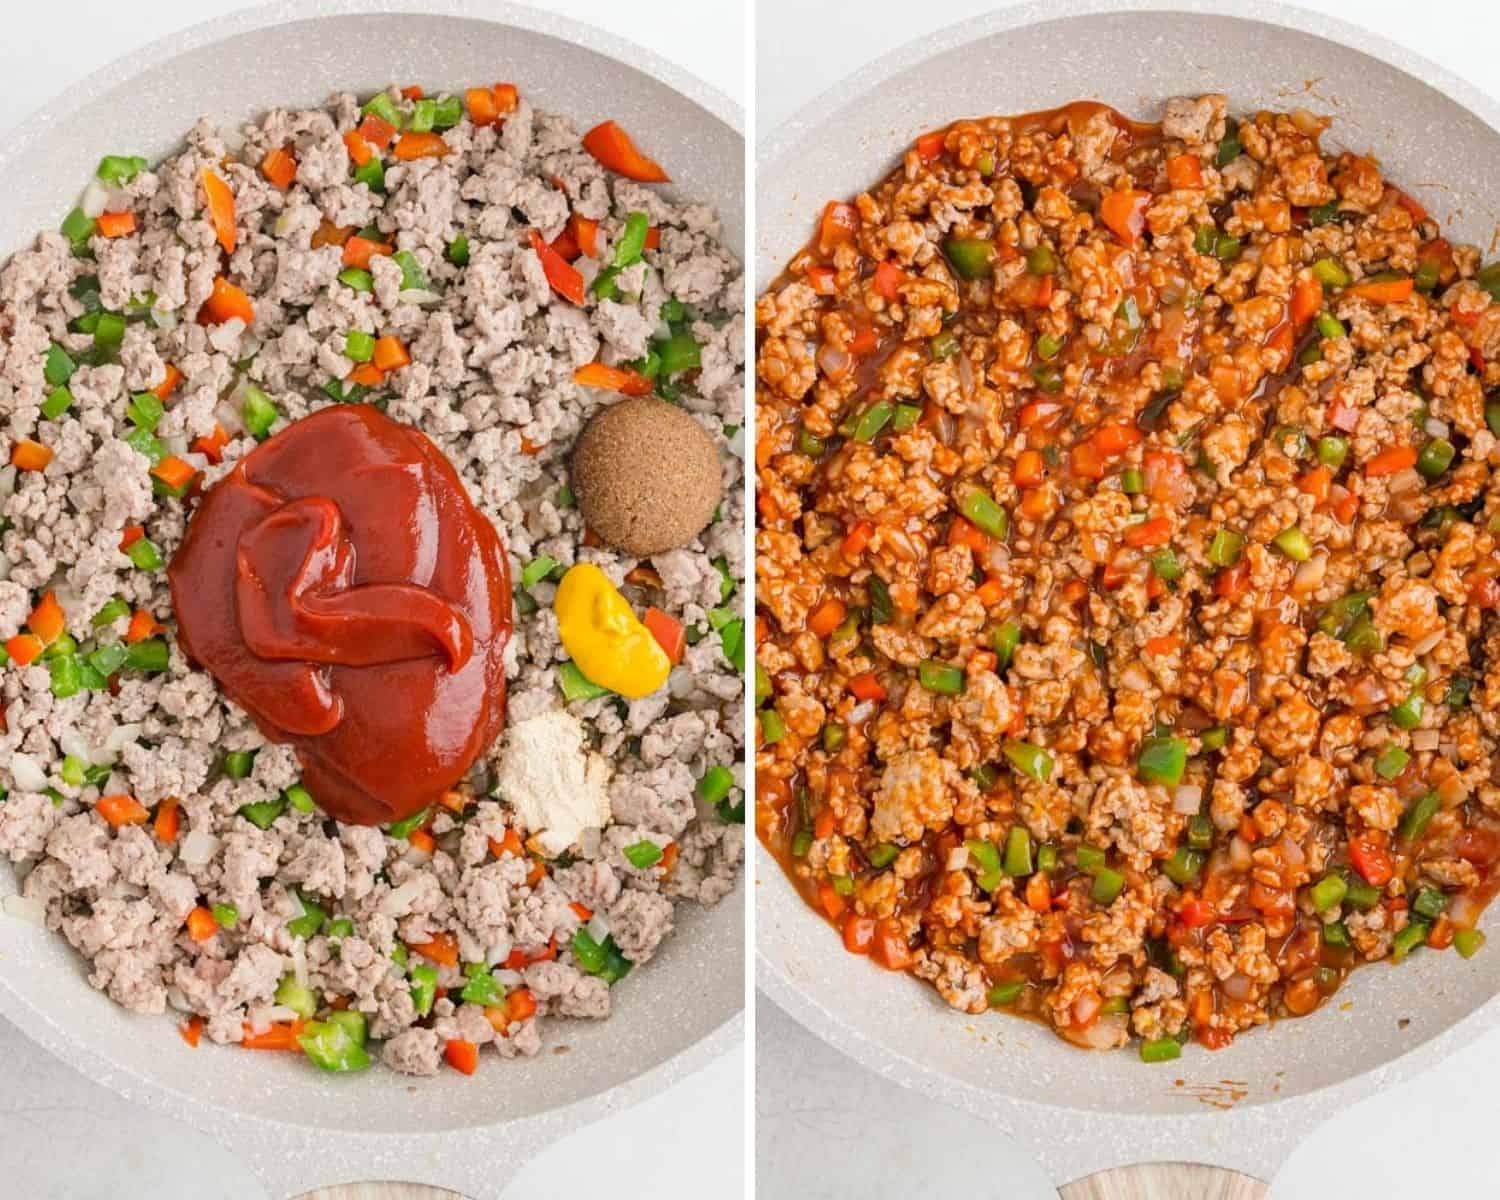 Sloppy joe before and after adding sauce.